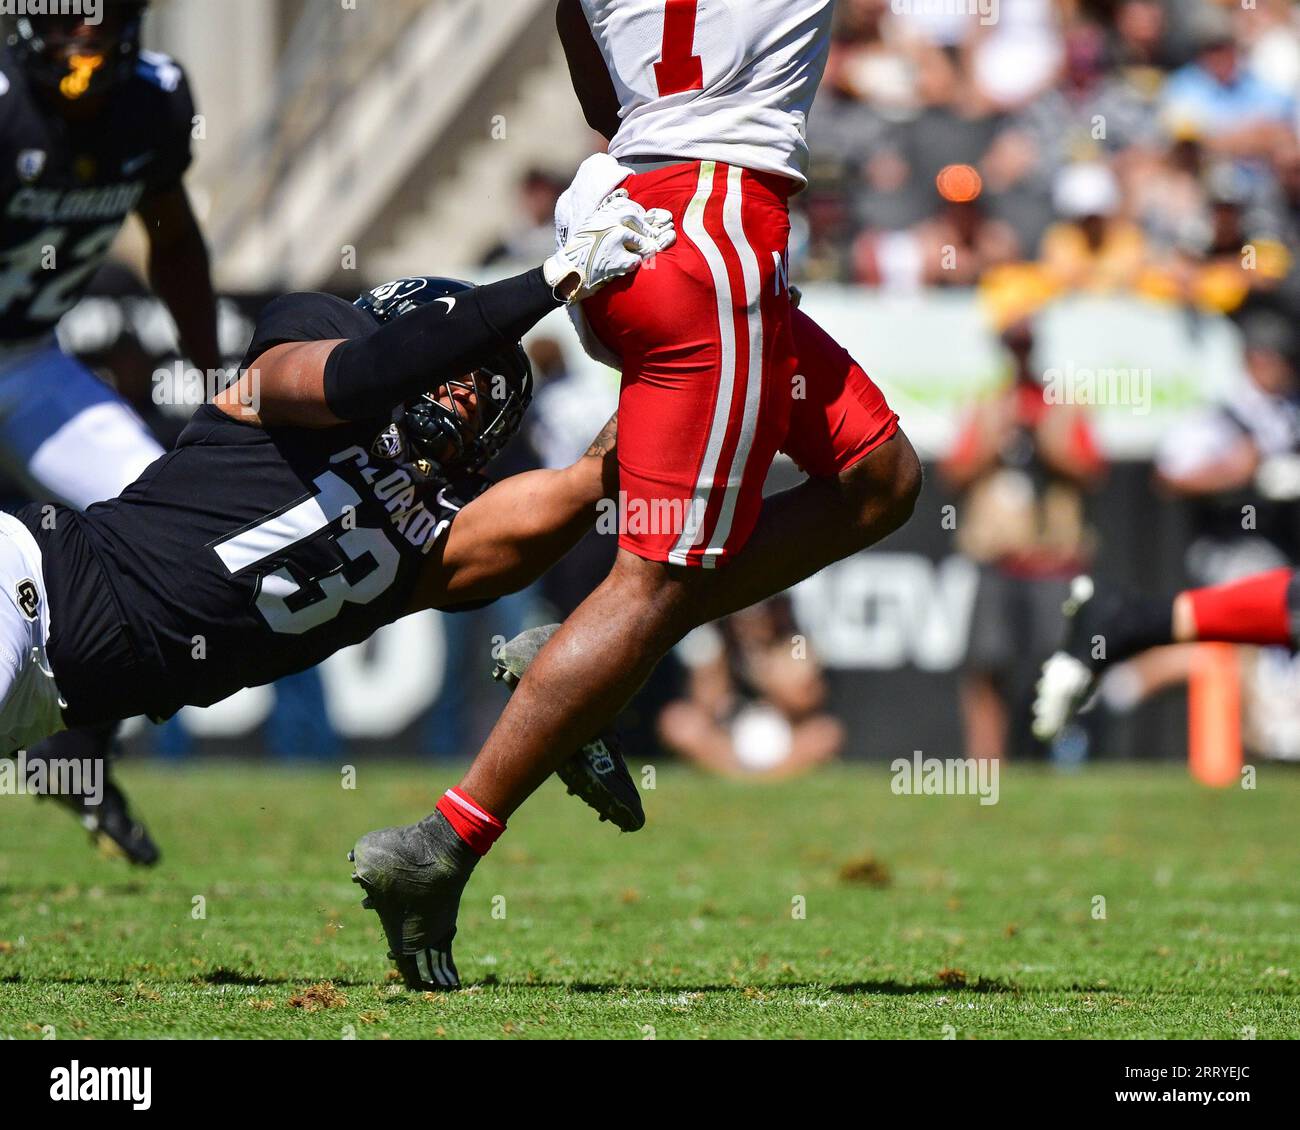 USA. 09th Sep, 2023. September 09, 2023: Colorado Buffaloes defensive end  Sav'ell Smalls (13) lays out to make a tackle of Nebraska Cornhuskers  quarterback Jeff Sims (7) in the football game between